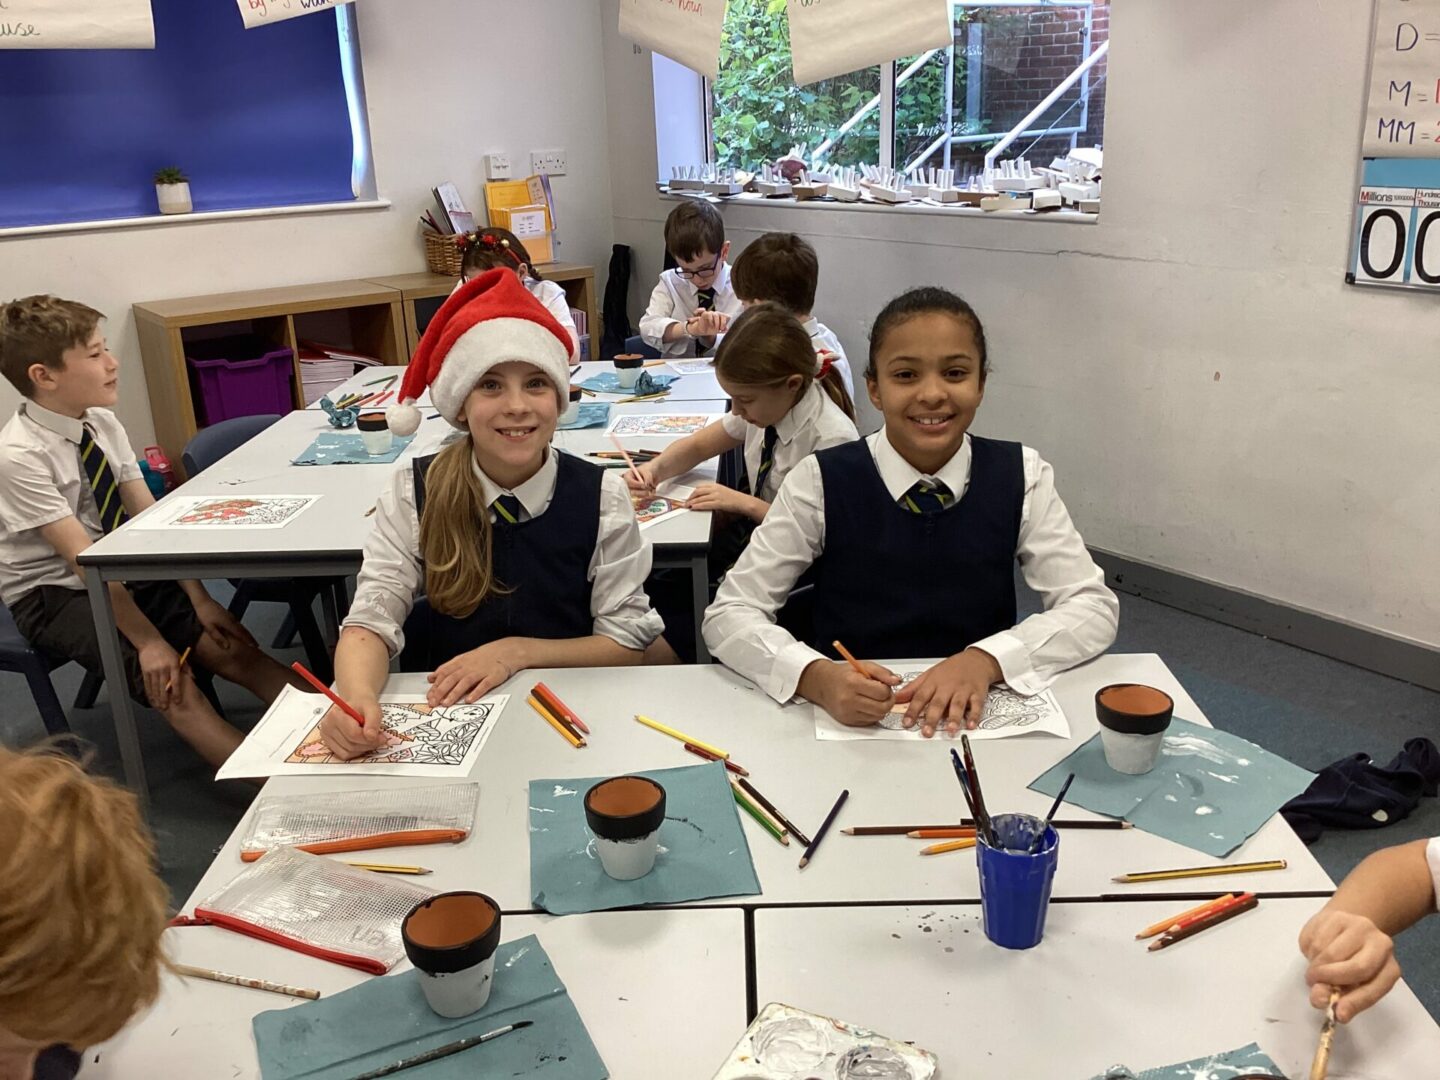 Year 5 enjoyed some colouring while they waited for their crafted pots to dry